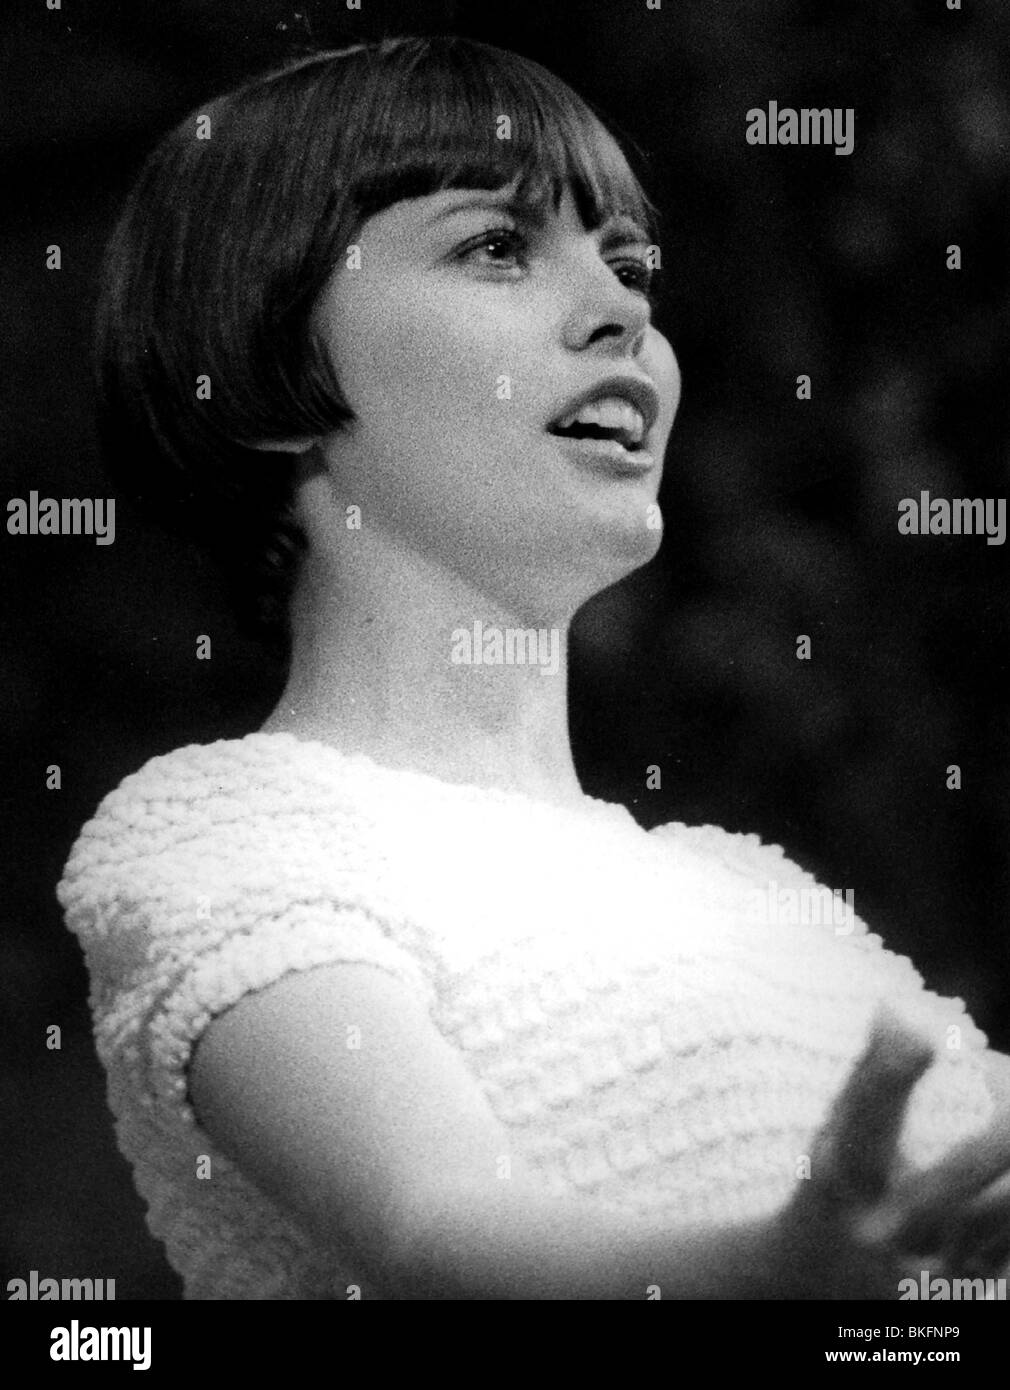 Mathieu, Mireille, * 22.7.1946, French singer, portrait, during a show, 1970s, Stock Photo